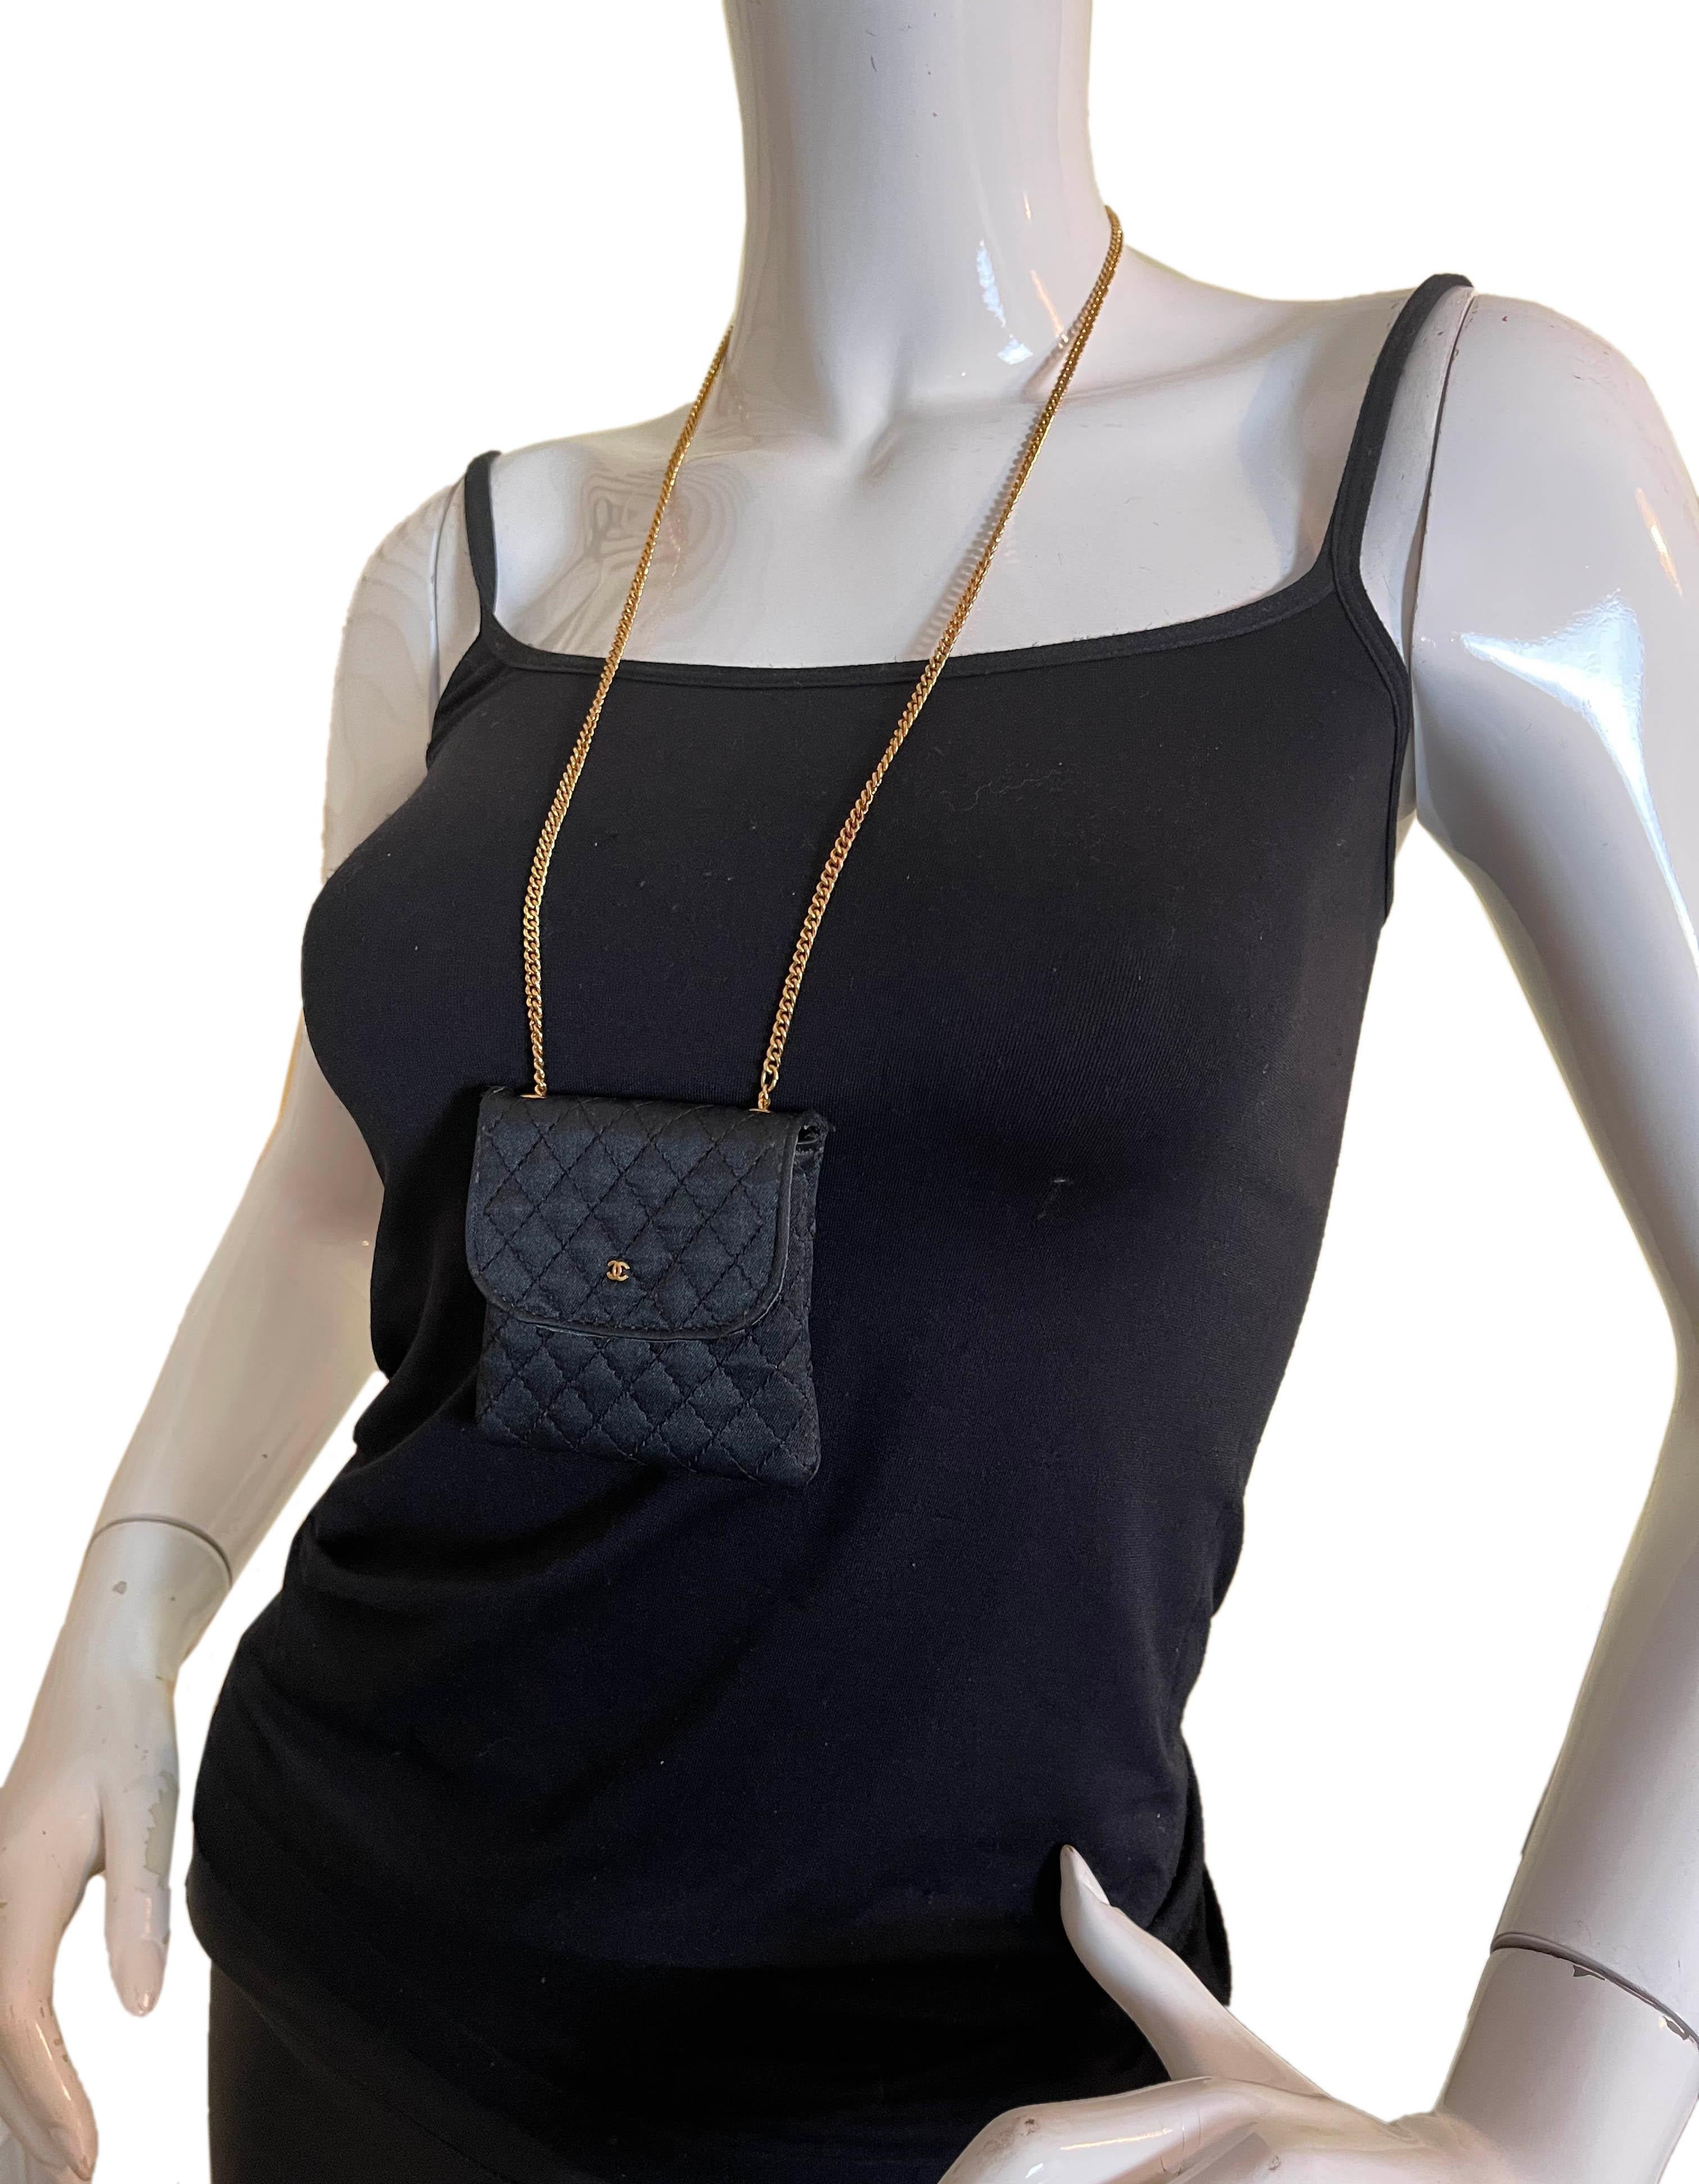 Chanel Black Vintage Quilted Satin Micro Flap Bag Necklace

Made In: France
Year of Production: 1990s
Color: Black
Hardware: Goldtone
Materials: Satin
Lining: Leather
Closure/Opening: Flap top with snap
Exterior Pockets: N/A
Interior Pockets: